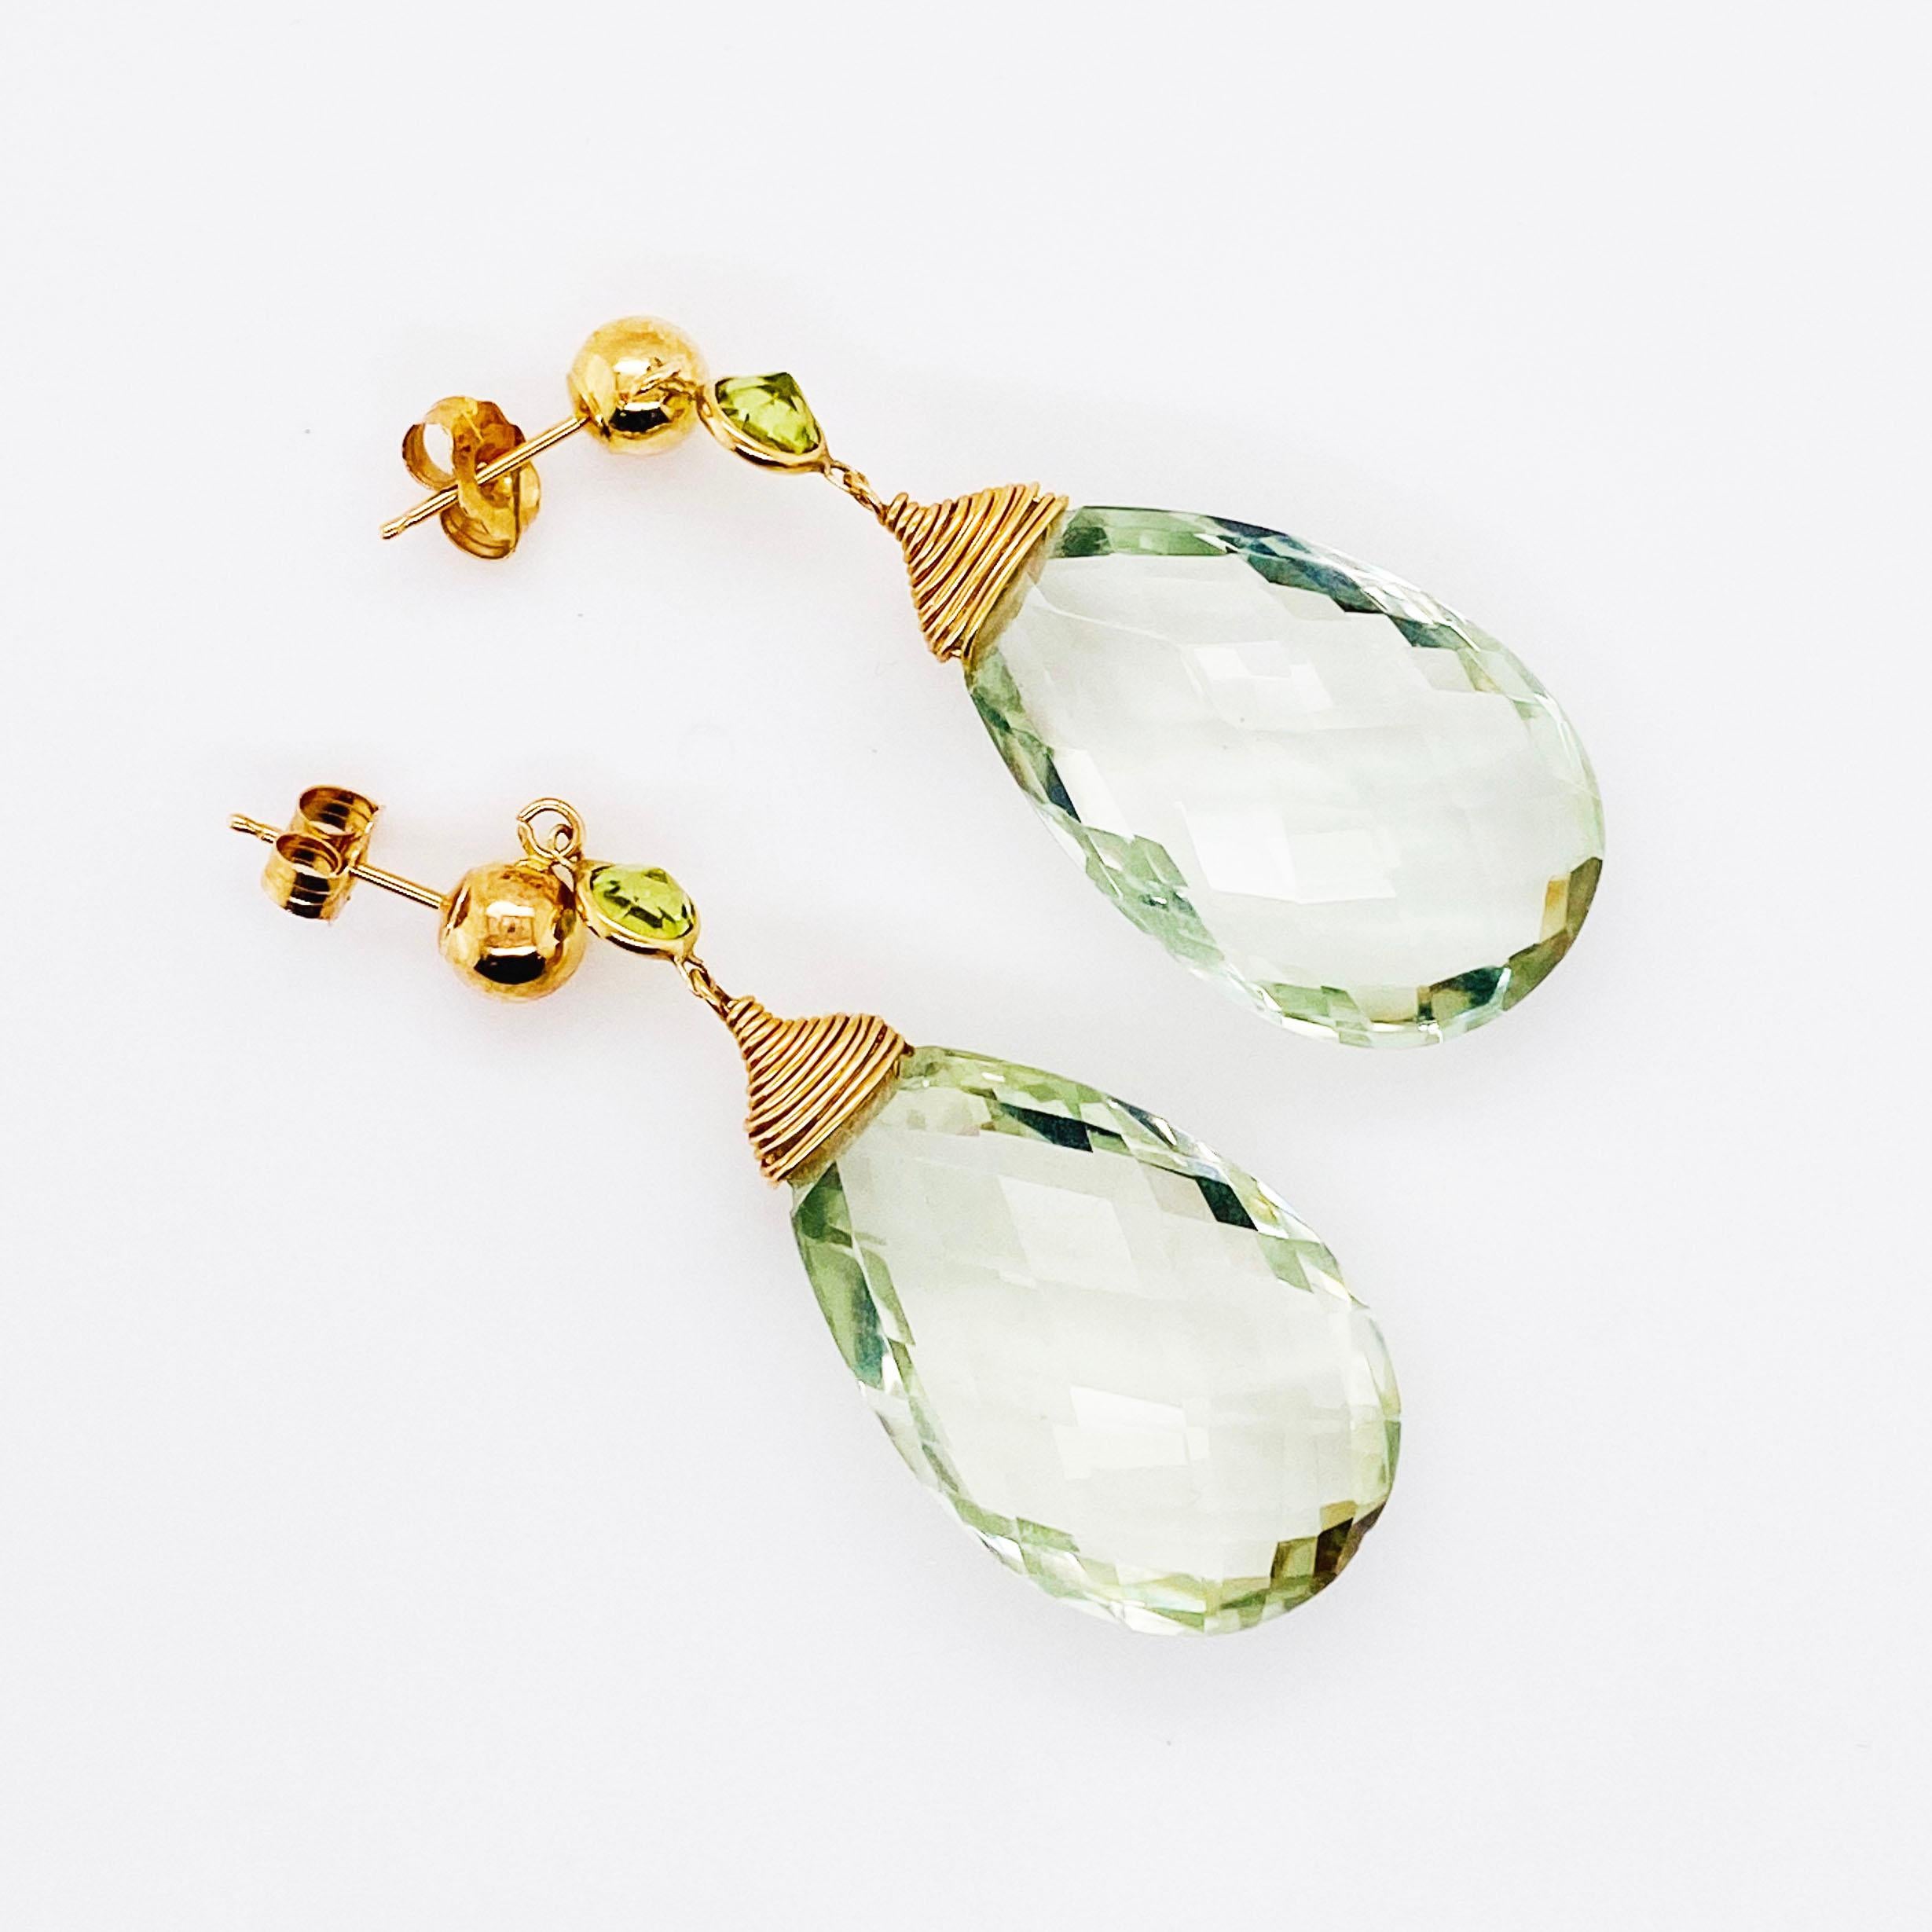 These splendid dangle earrings are real statement earrings!  There is a large briolette green quartz dangling from each earring with a bezel set green peridot above it.  The bangles are hanging from a 6 millimeter (mm) 14 karat yellow gold ball